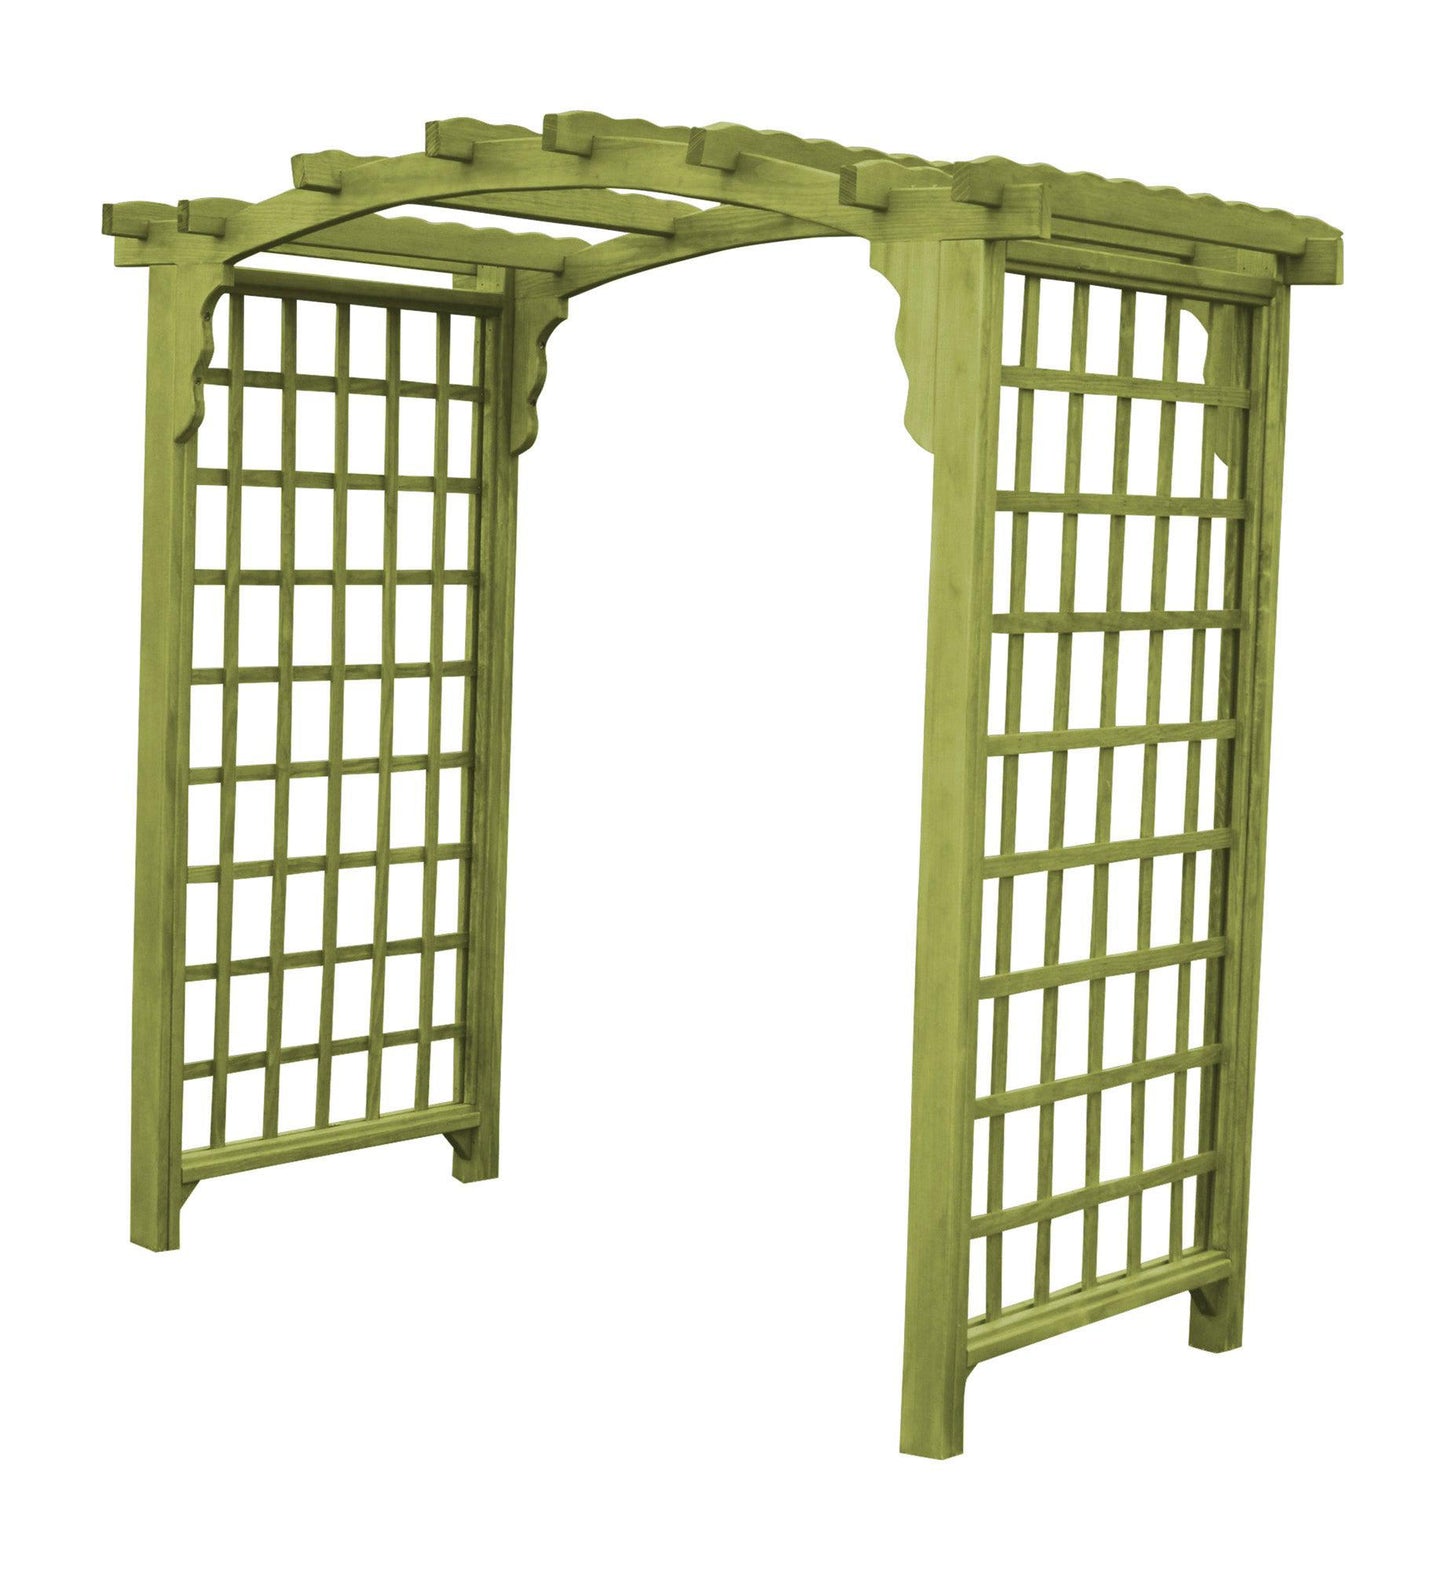 A&L FURNITURE CO. 6' Jamesport Pressure Treated Pine Arbor - LEAD TIME TO SHIP 10 BUSINESS DAYS